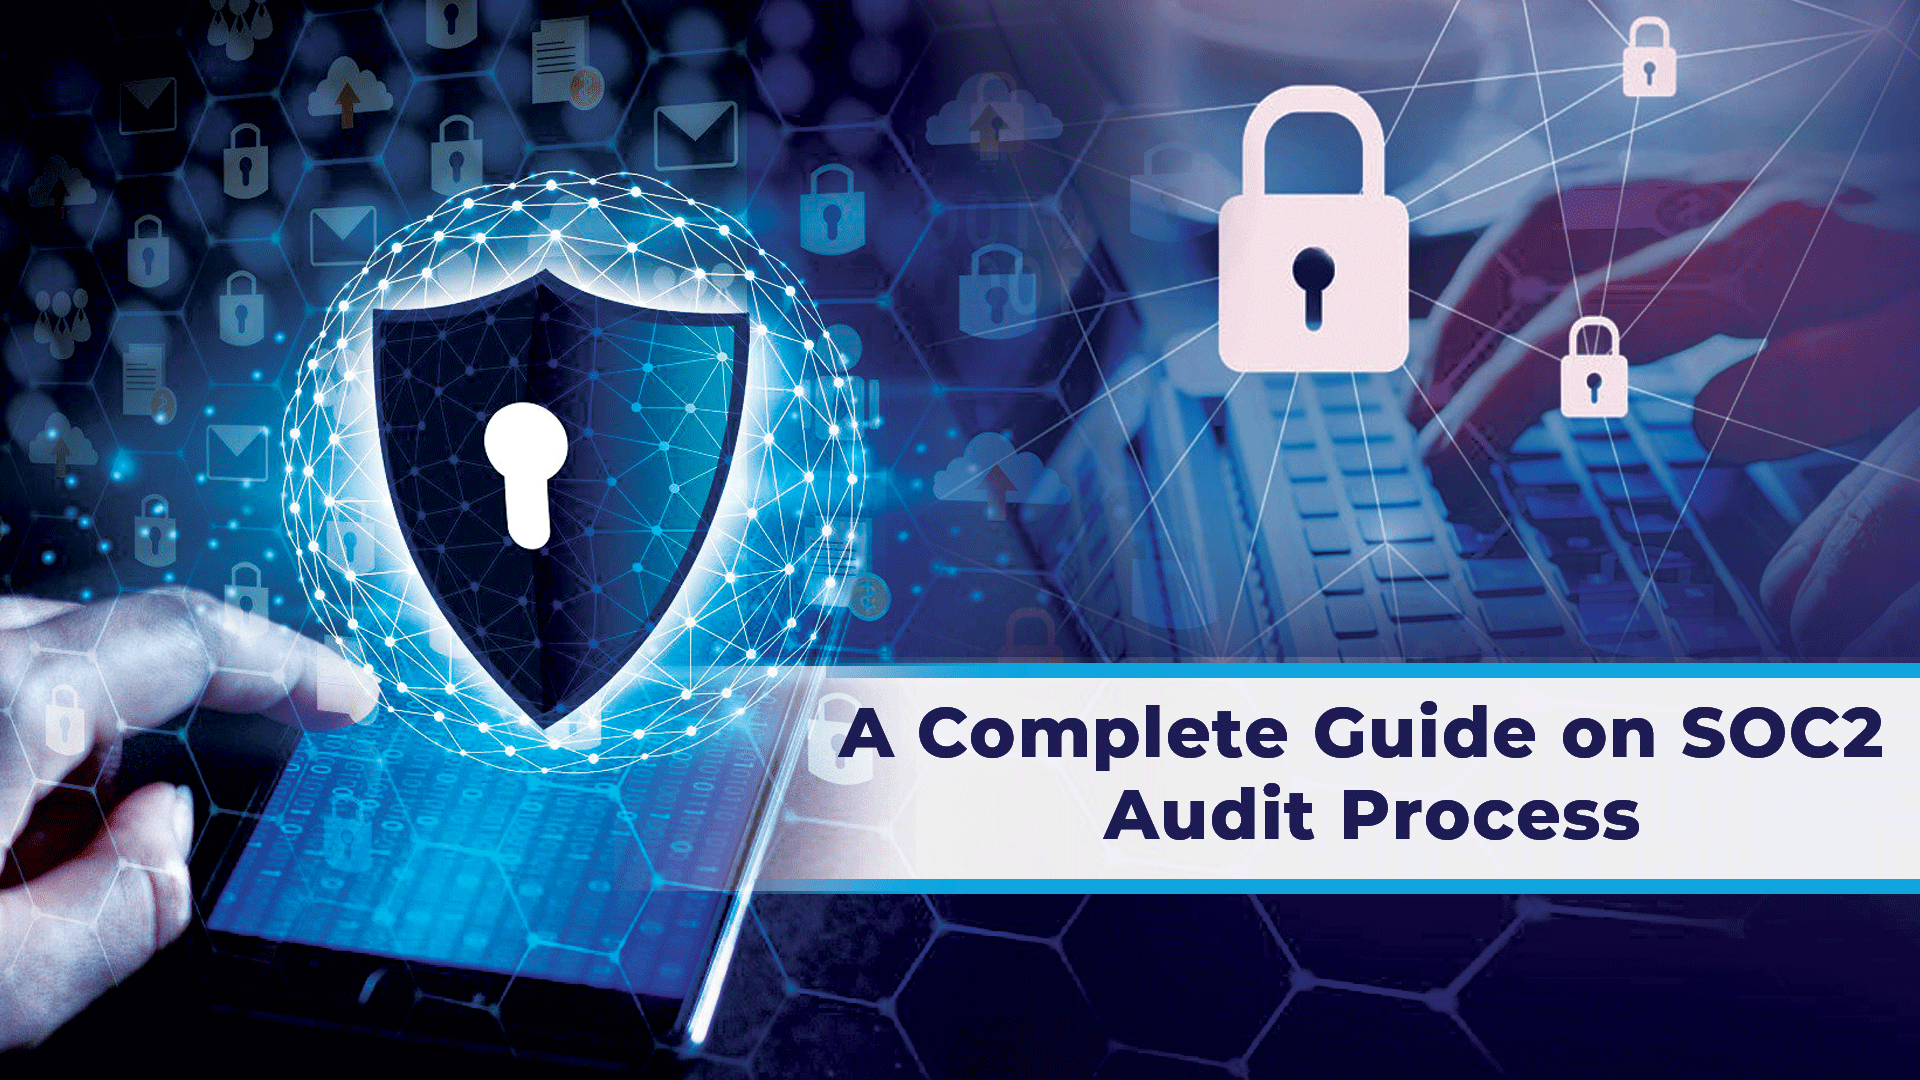 A Complete Guide on SOC 2 Audit Process